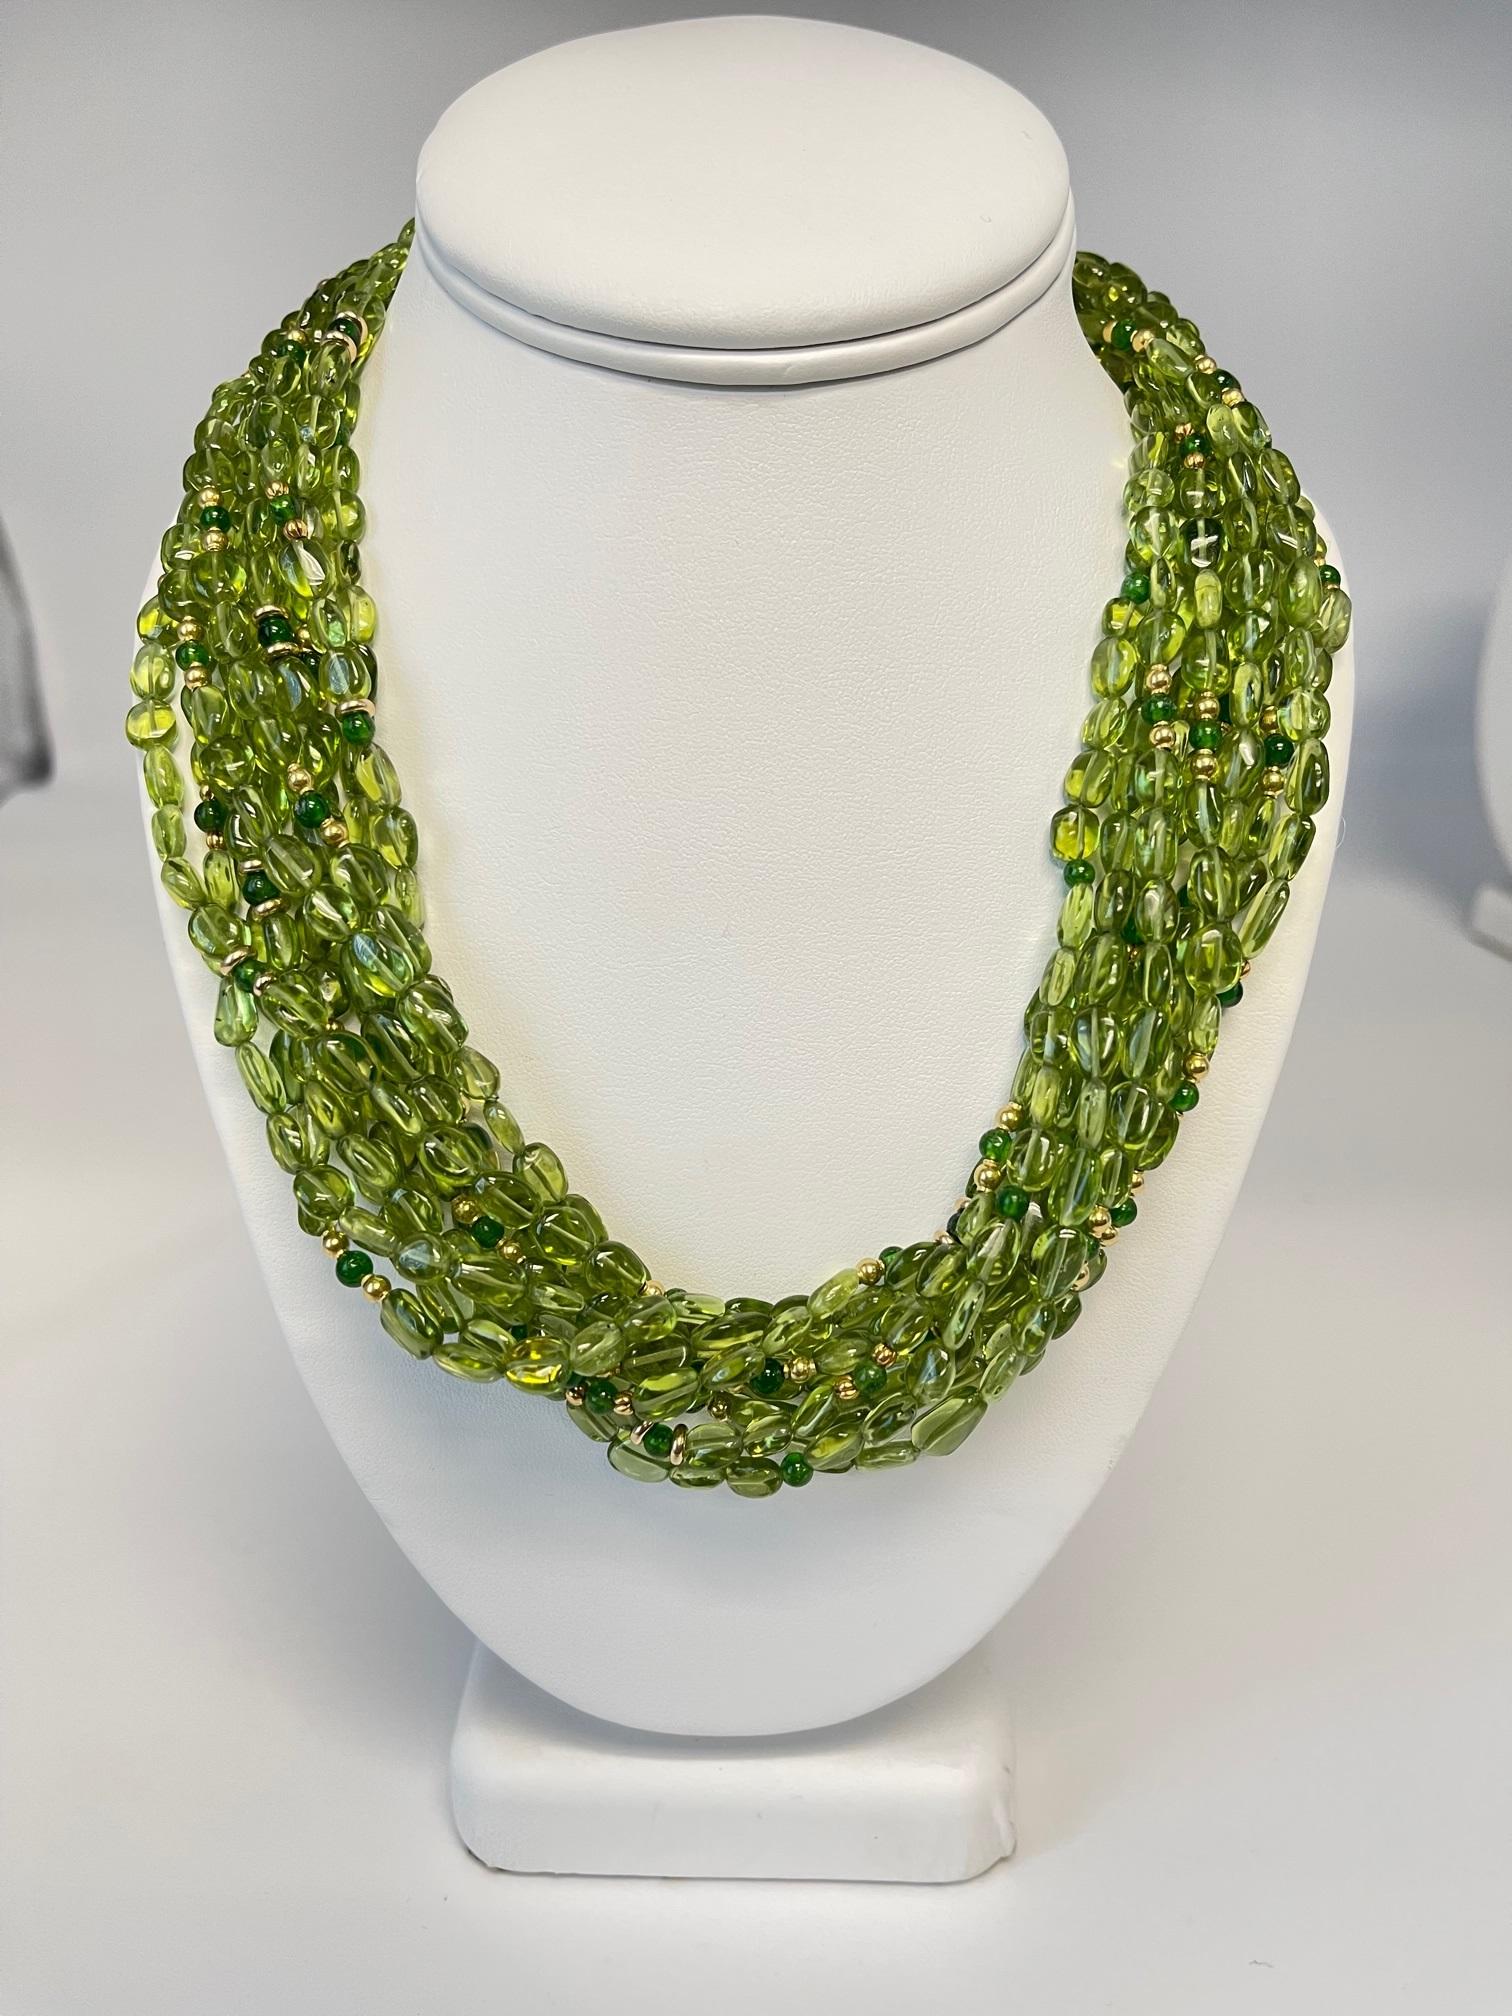 This impressive torsade necklace is comprised of 10 individual strands of freeform oval peridot beads, hand strung on green silk thread and accented with 18k yellow gold spacers and round chrome diopside beads! The peridots are exceptionally clean,